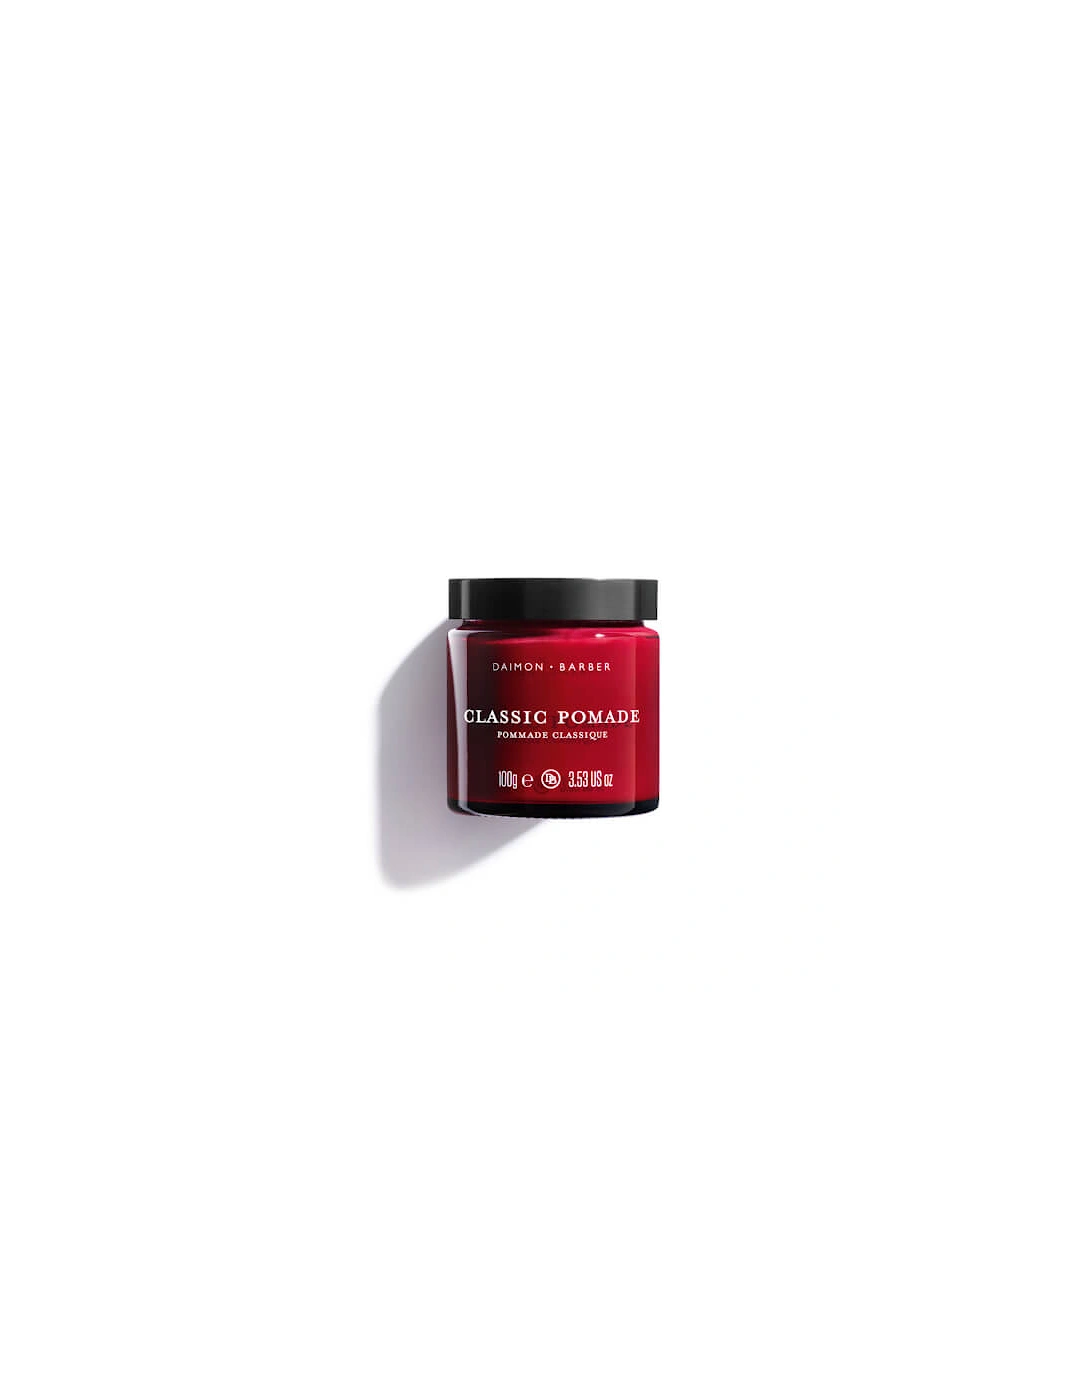 Classic Pomade 100g - Daimon Barber, 2 of 1